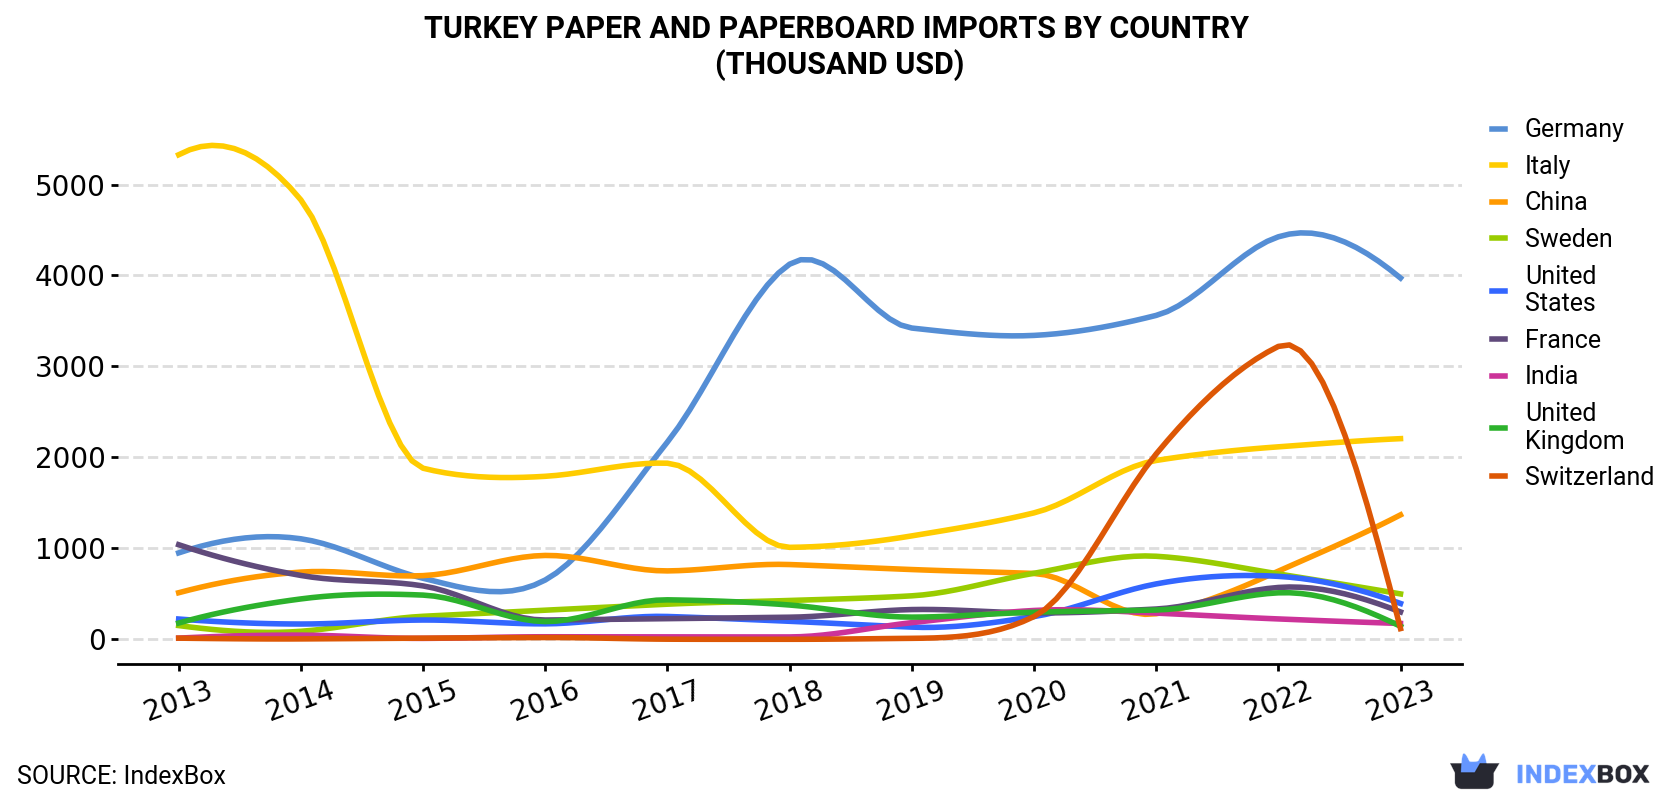 Turkey Paper And Paperboard Imports By Country (Thousand USD)